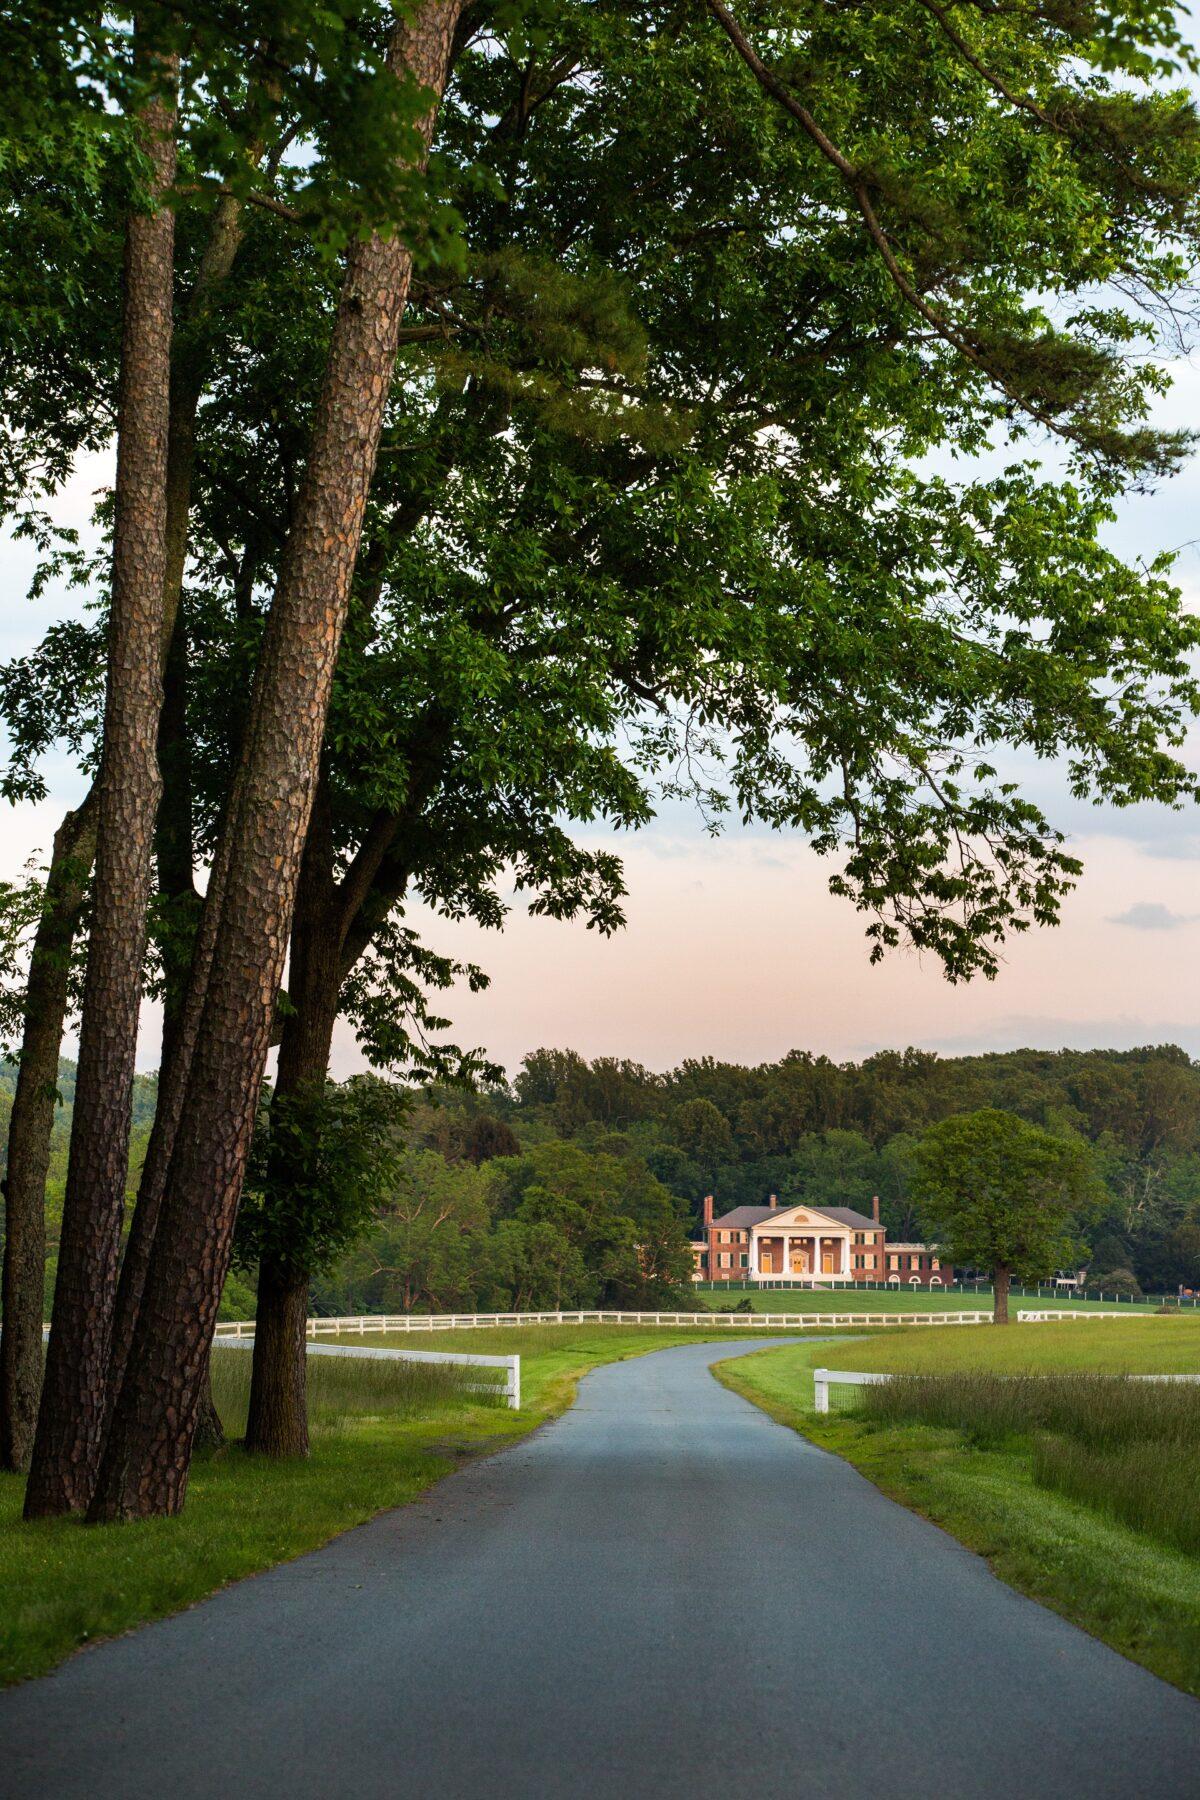 The approach to the grounds of the Montpelier historical property. (Courtesy of Montpelier Foundation)